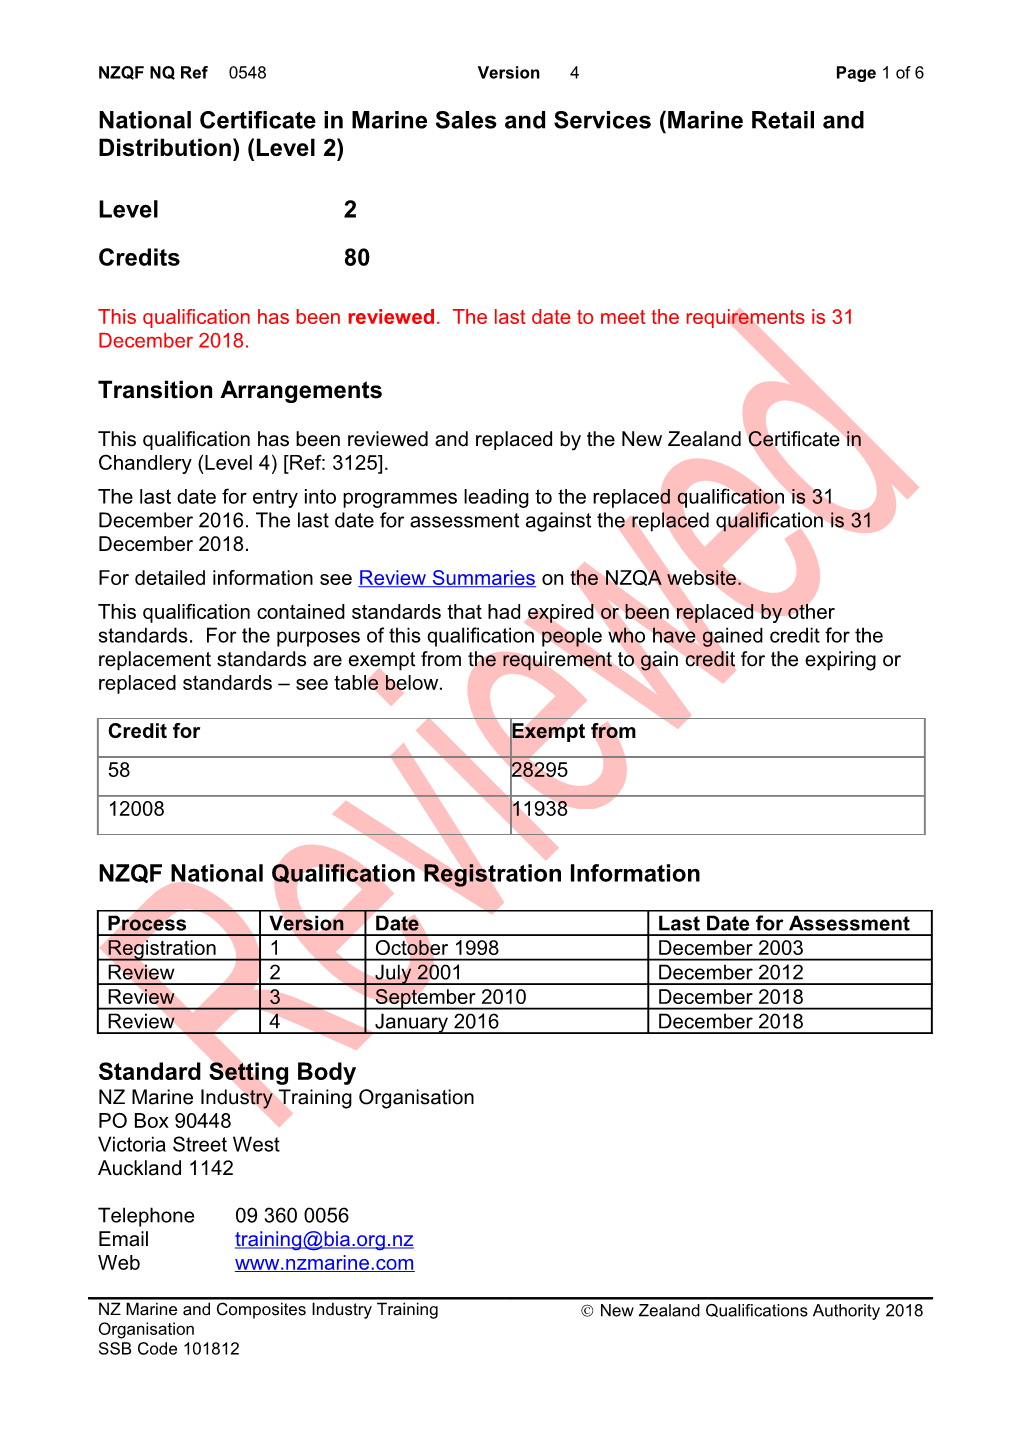 0548 National Certificate in Marine Sales and Services (Marine Retail and Distribution)